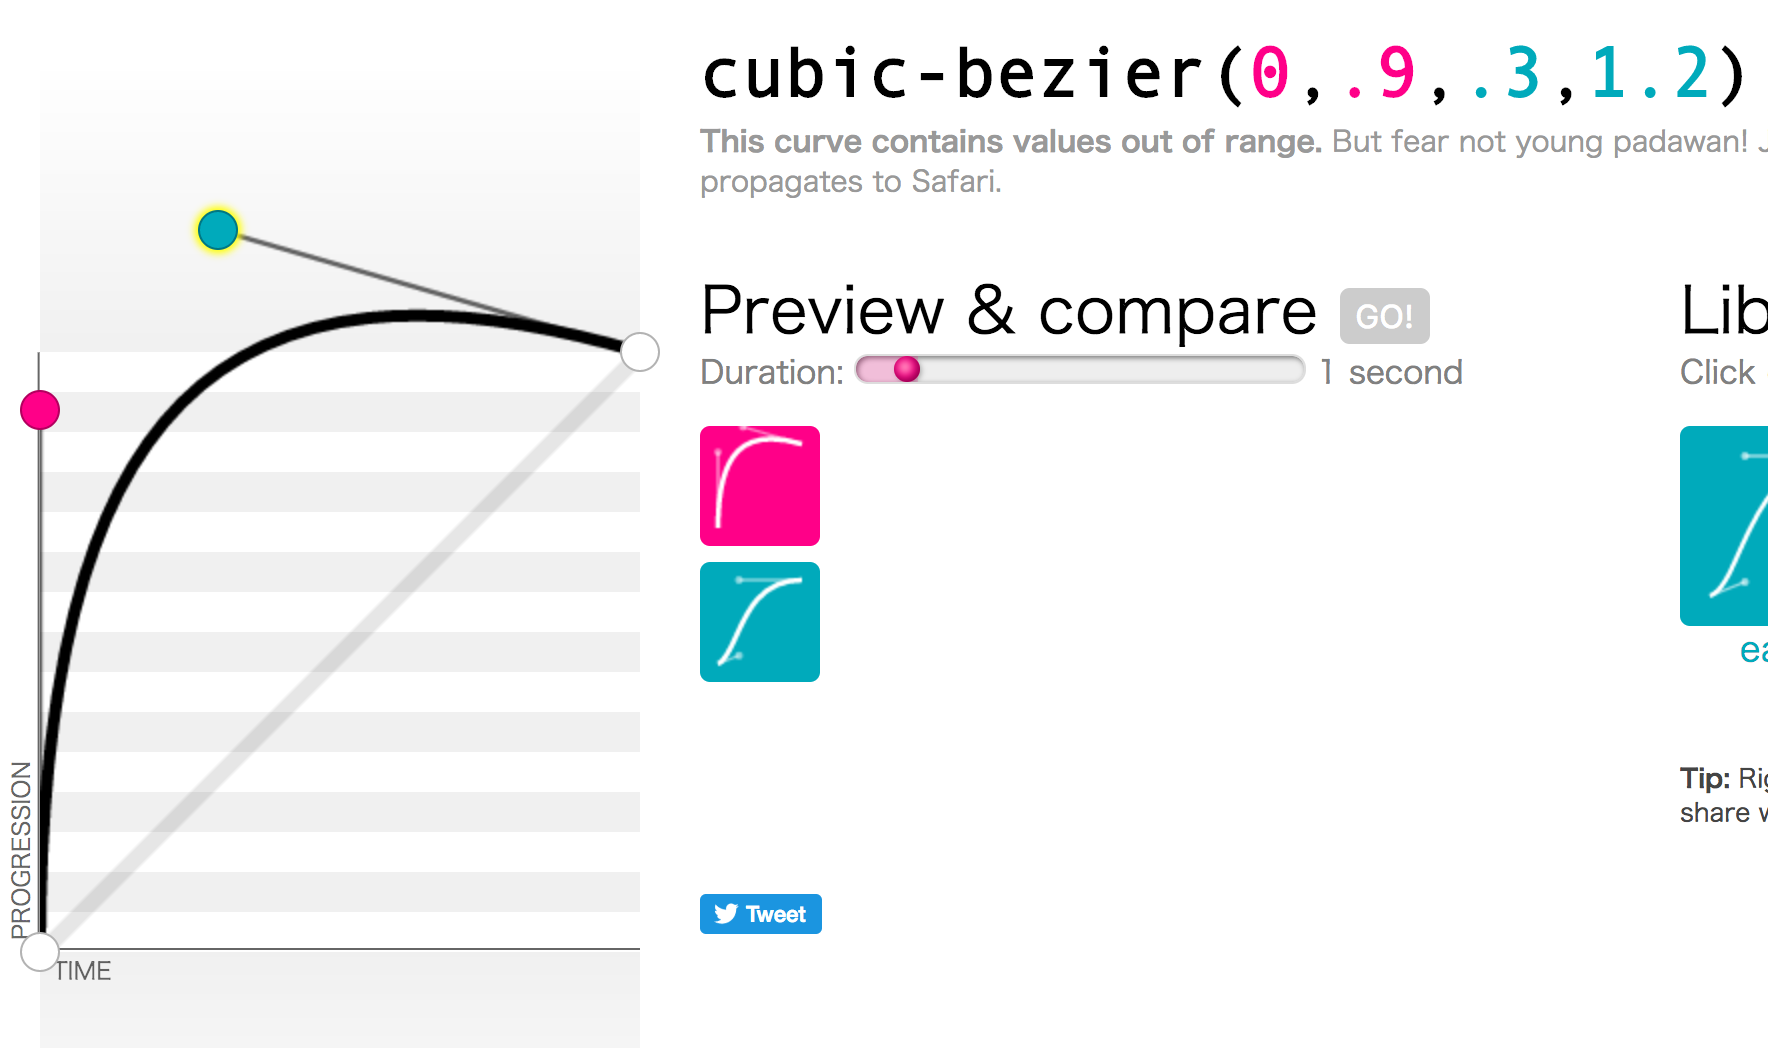 A bezier curve with points 0, .9, .3, 1.2